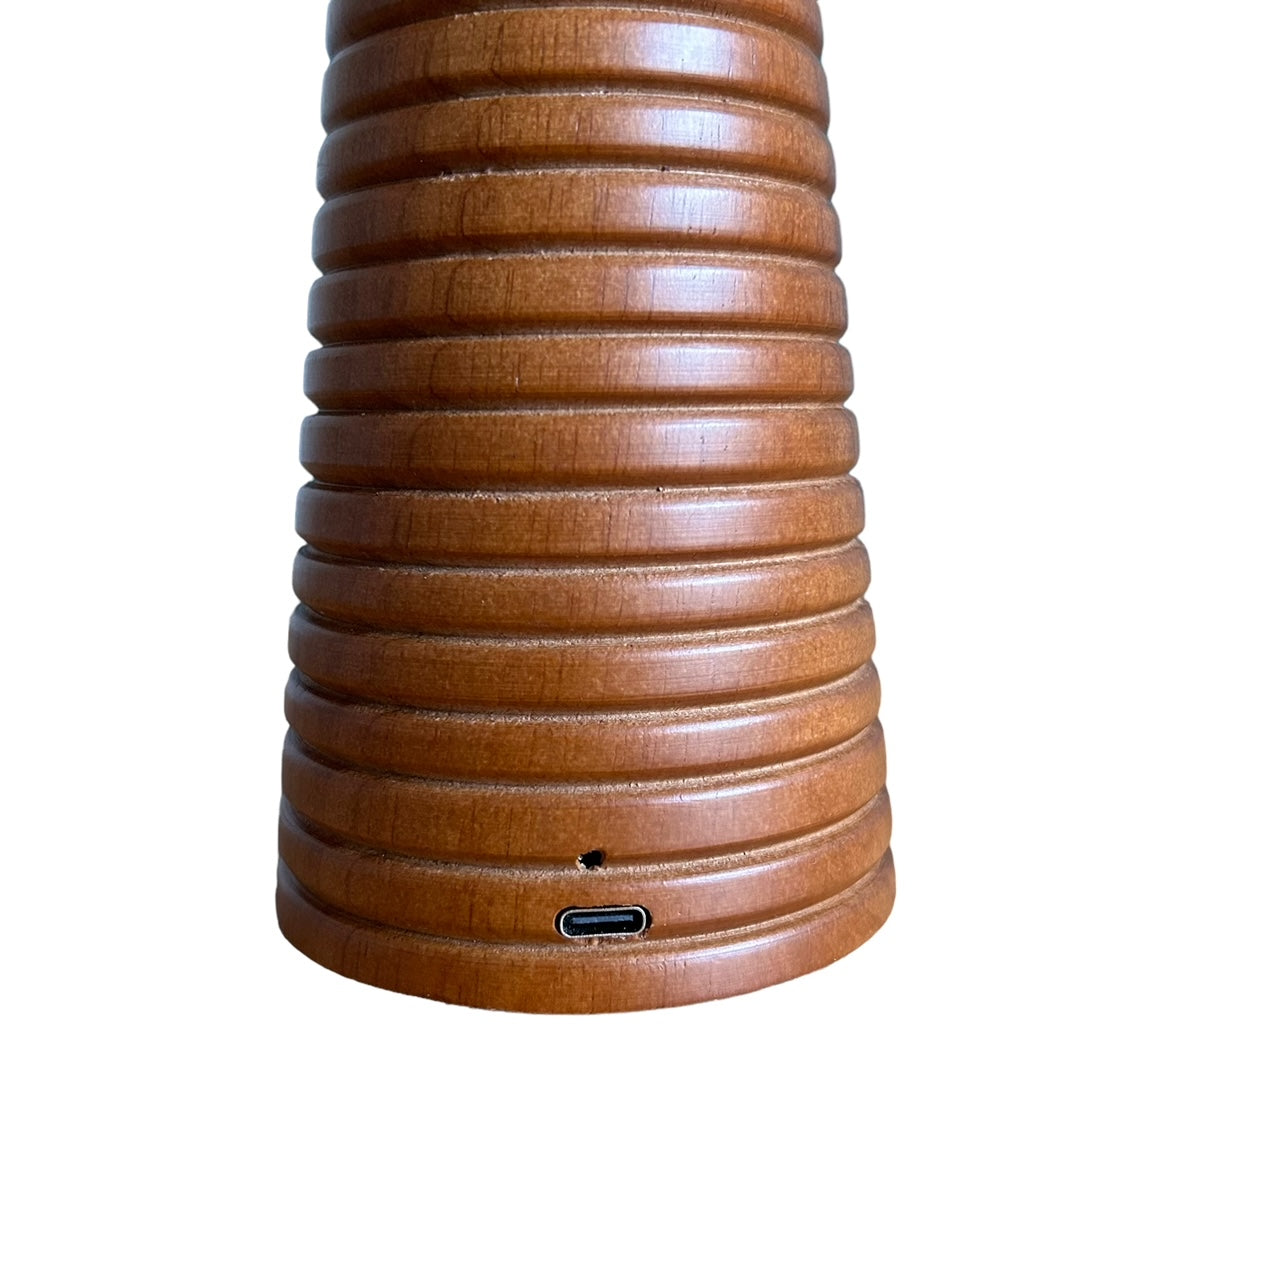 Rechargable touch lamp - ribbed teak style wood